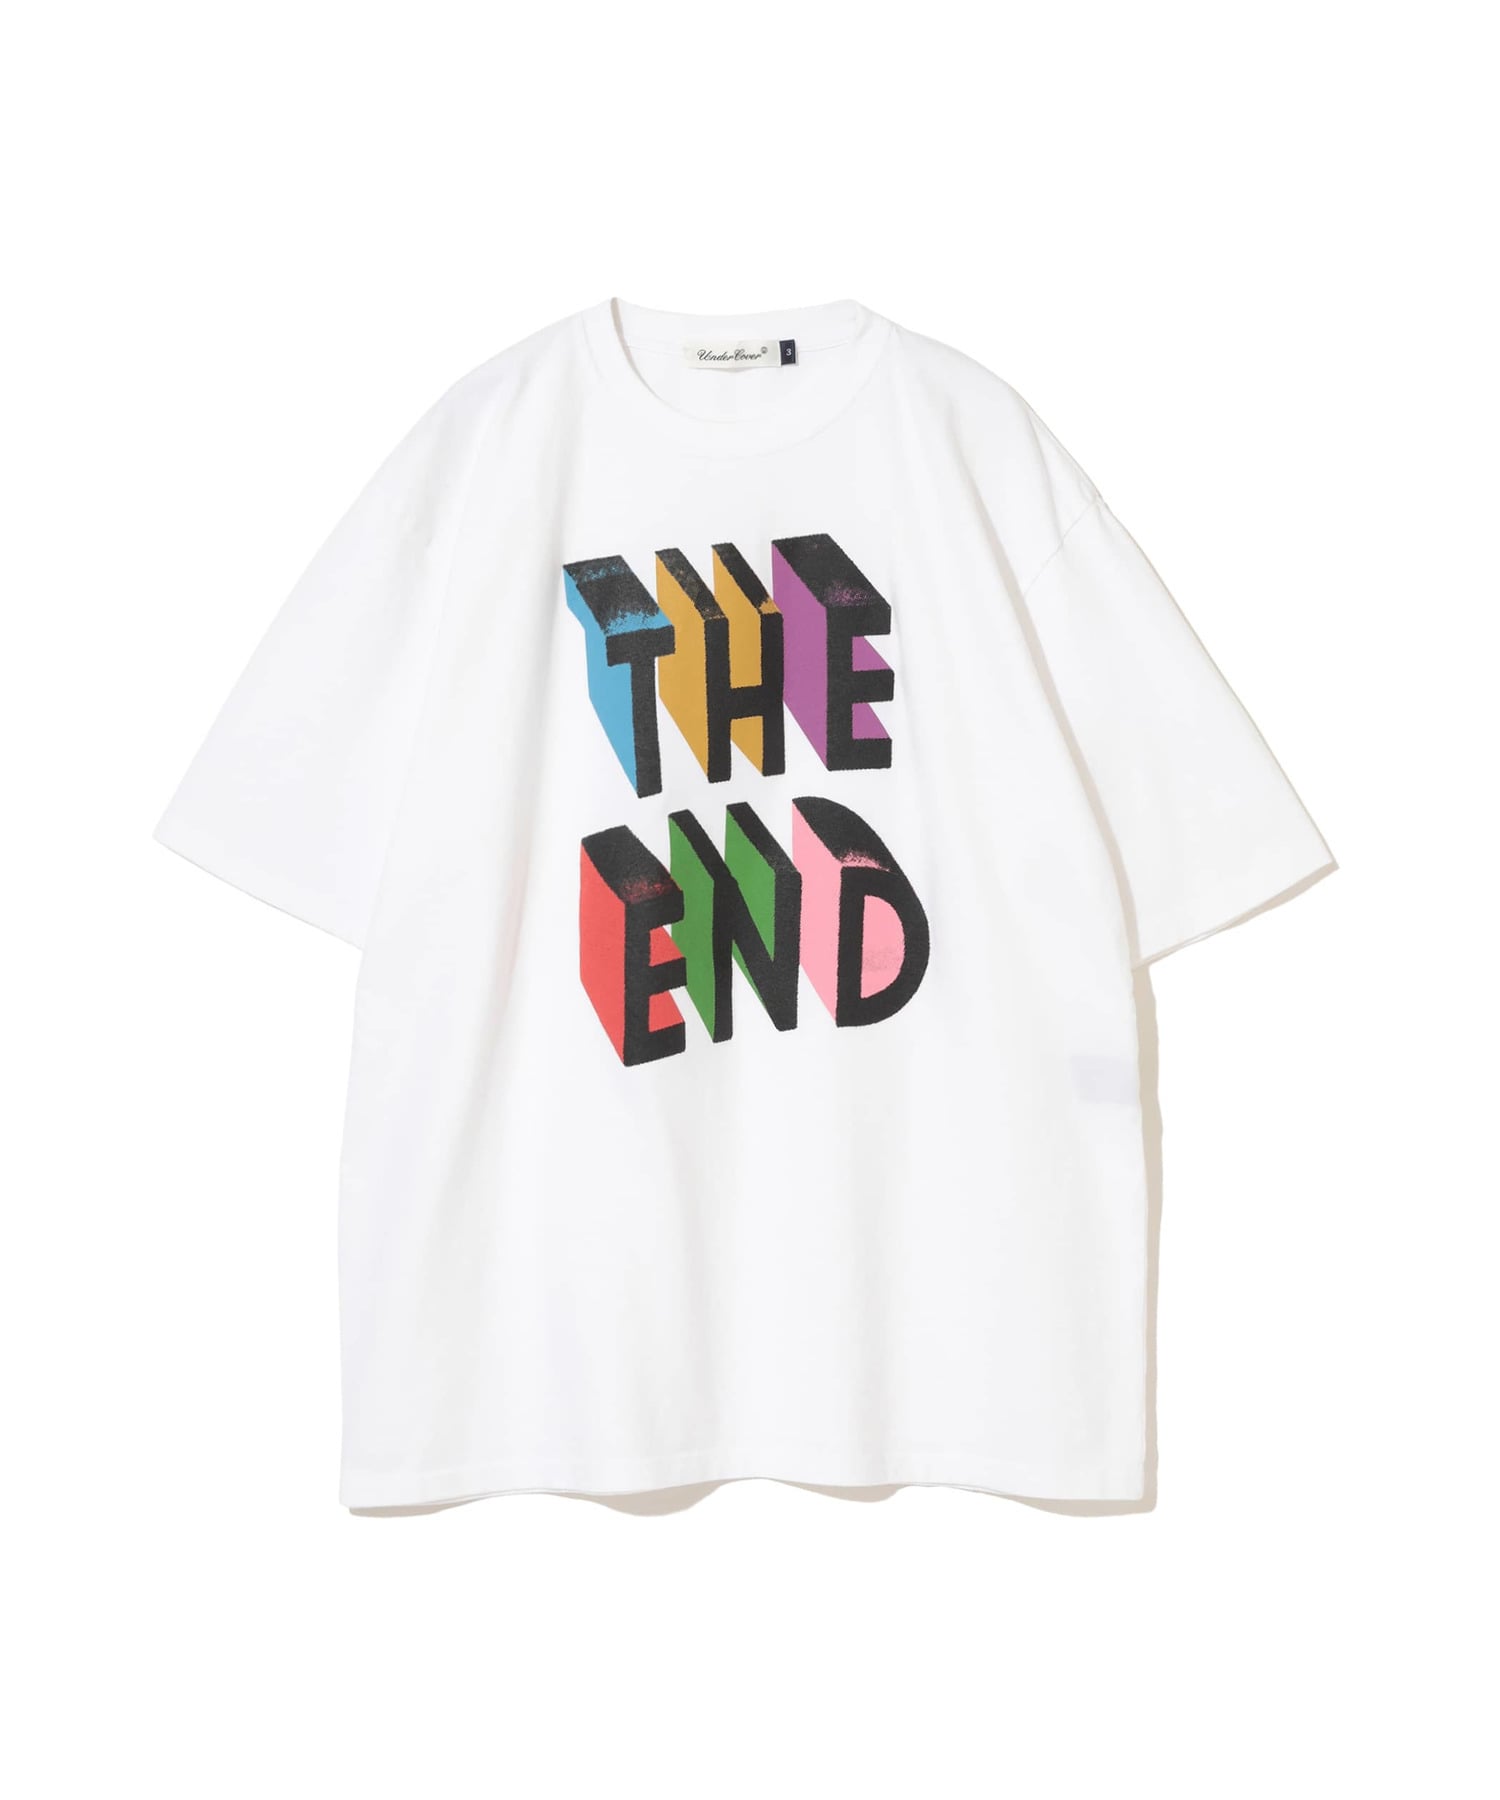 TEE THE END